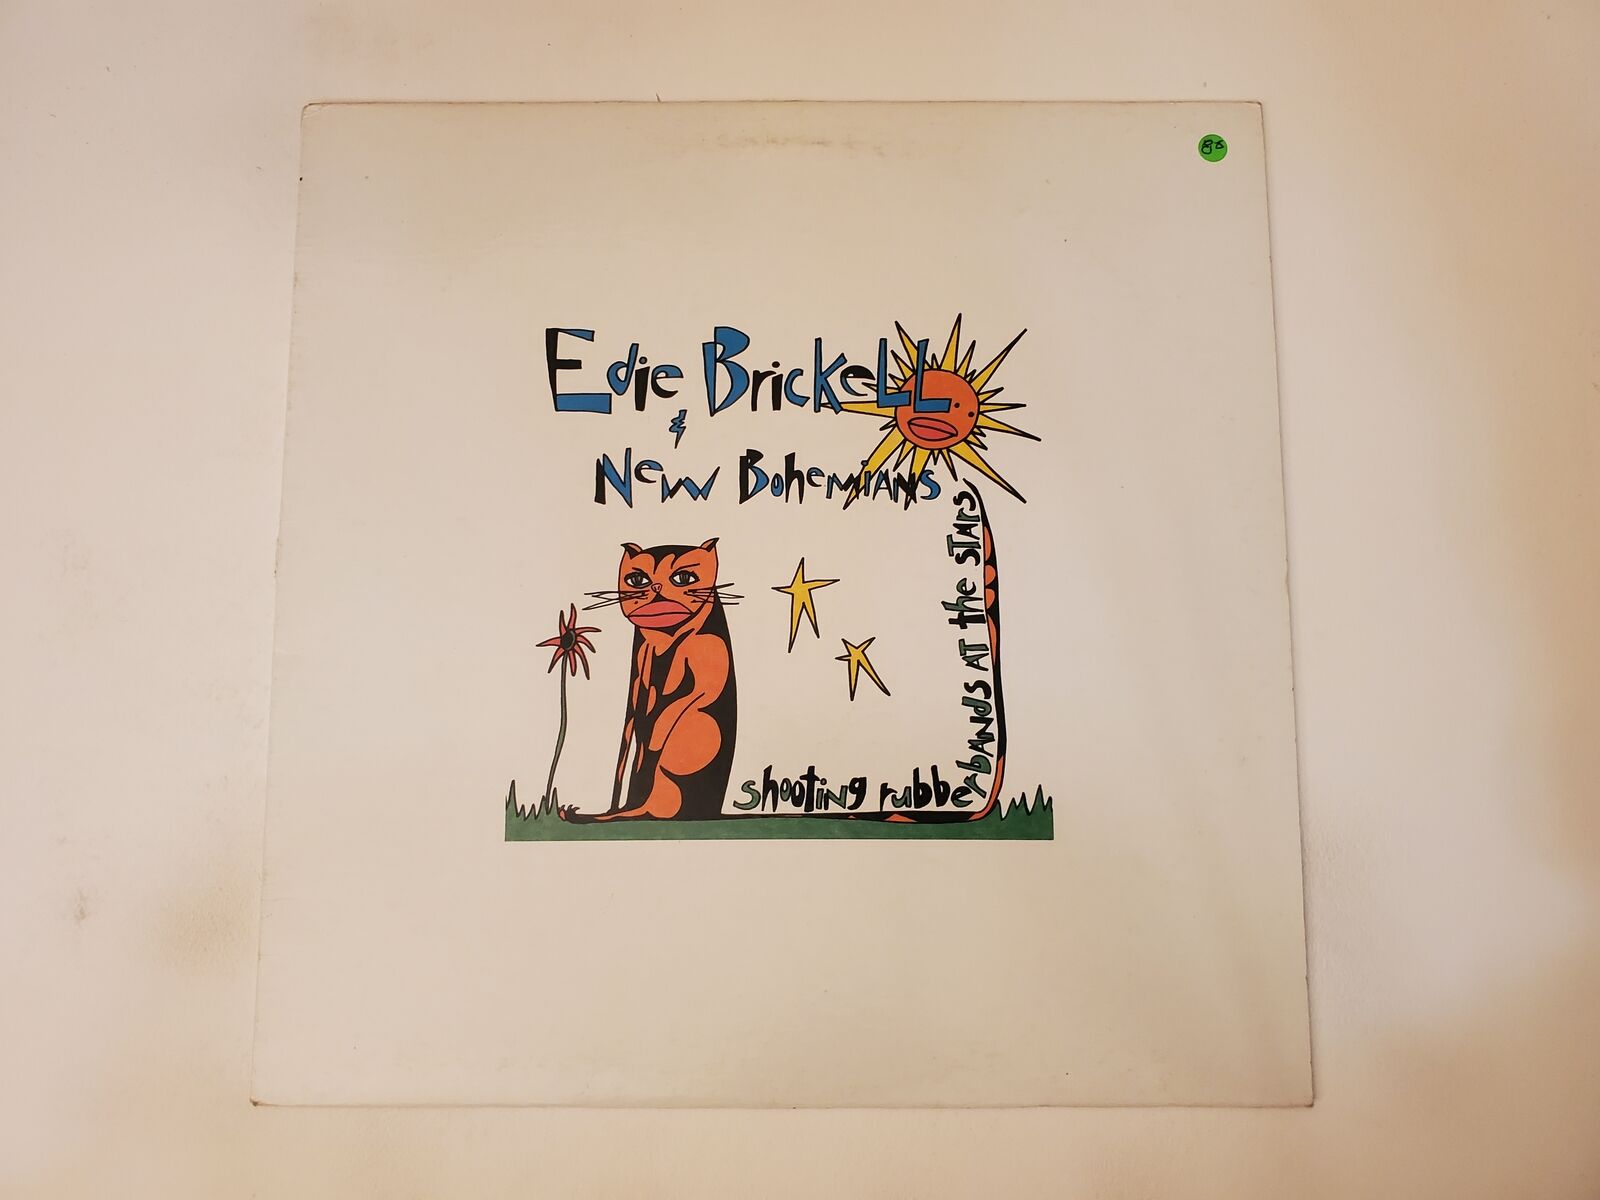 Edie Brickell & New Bohemians - Shooting Rubberbands At The Stars (Vinyl Record